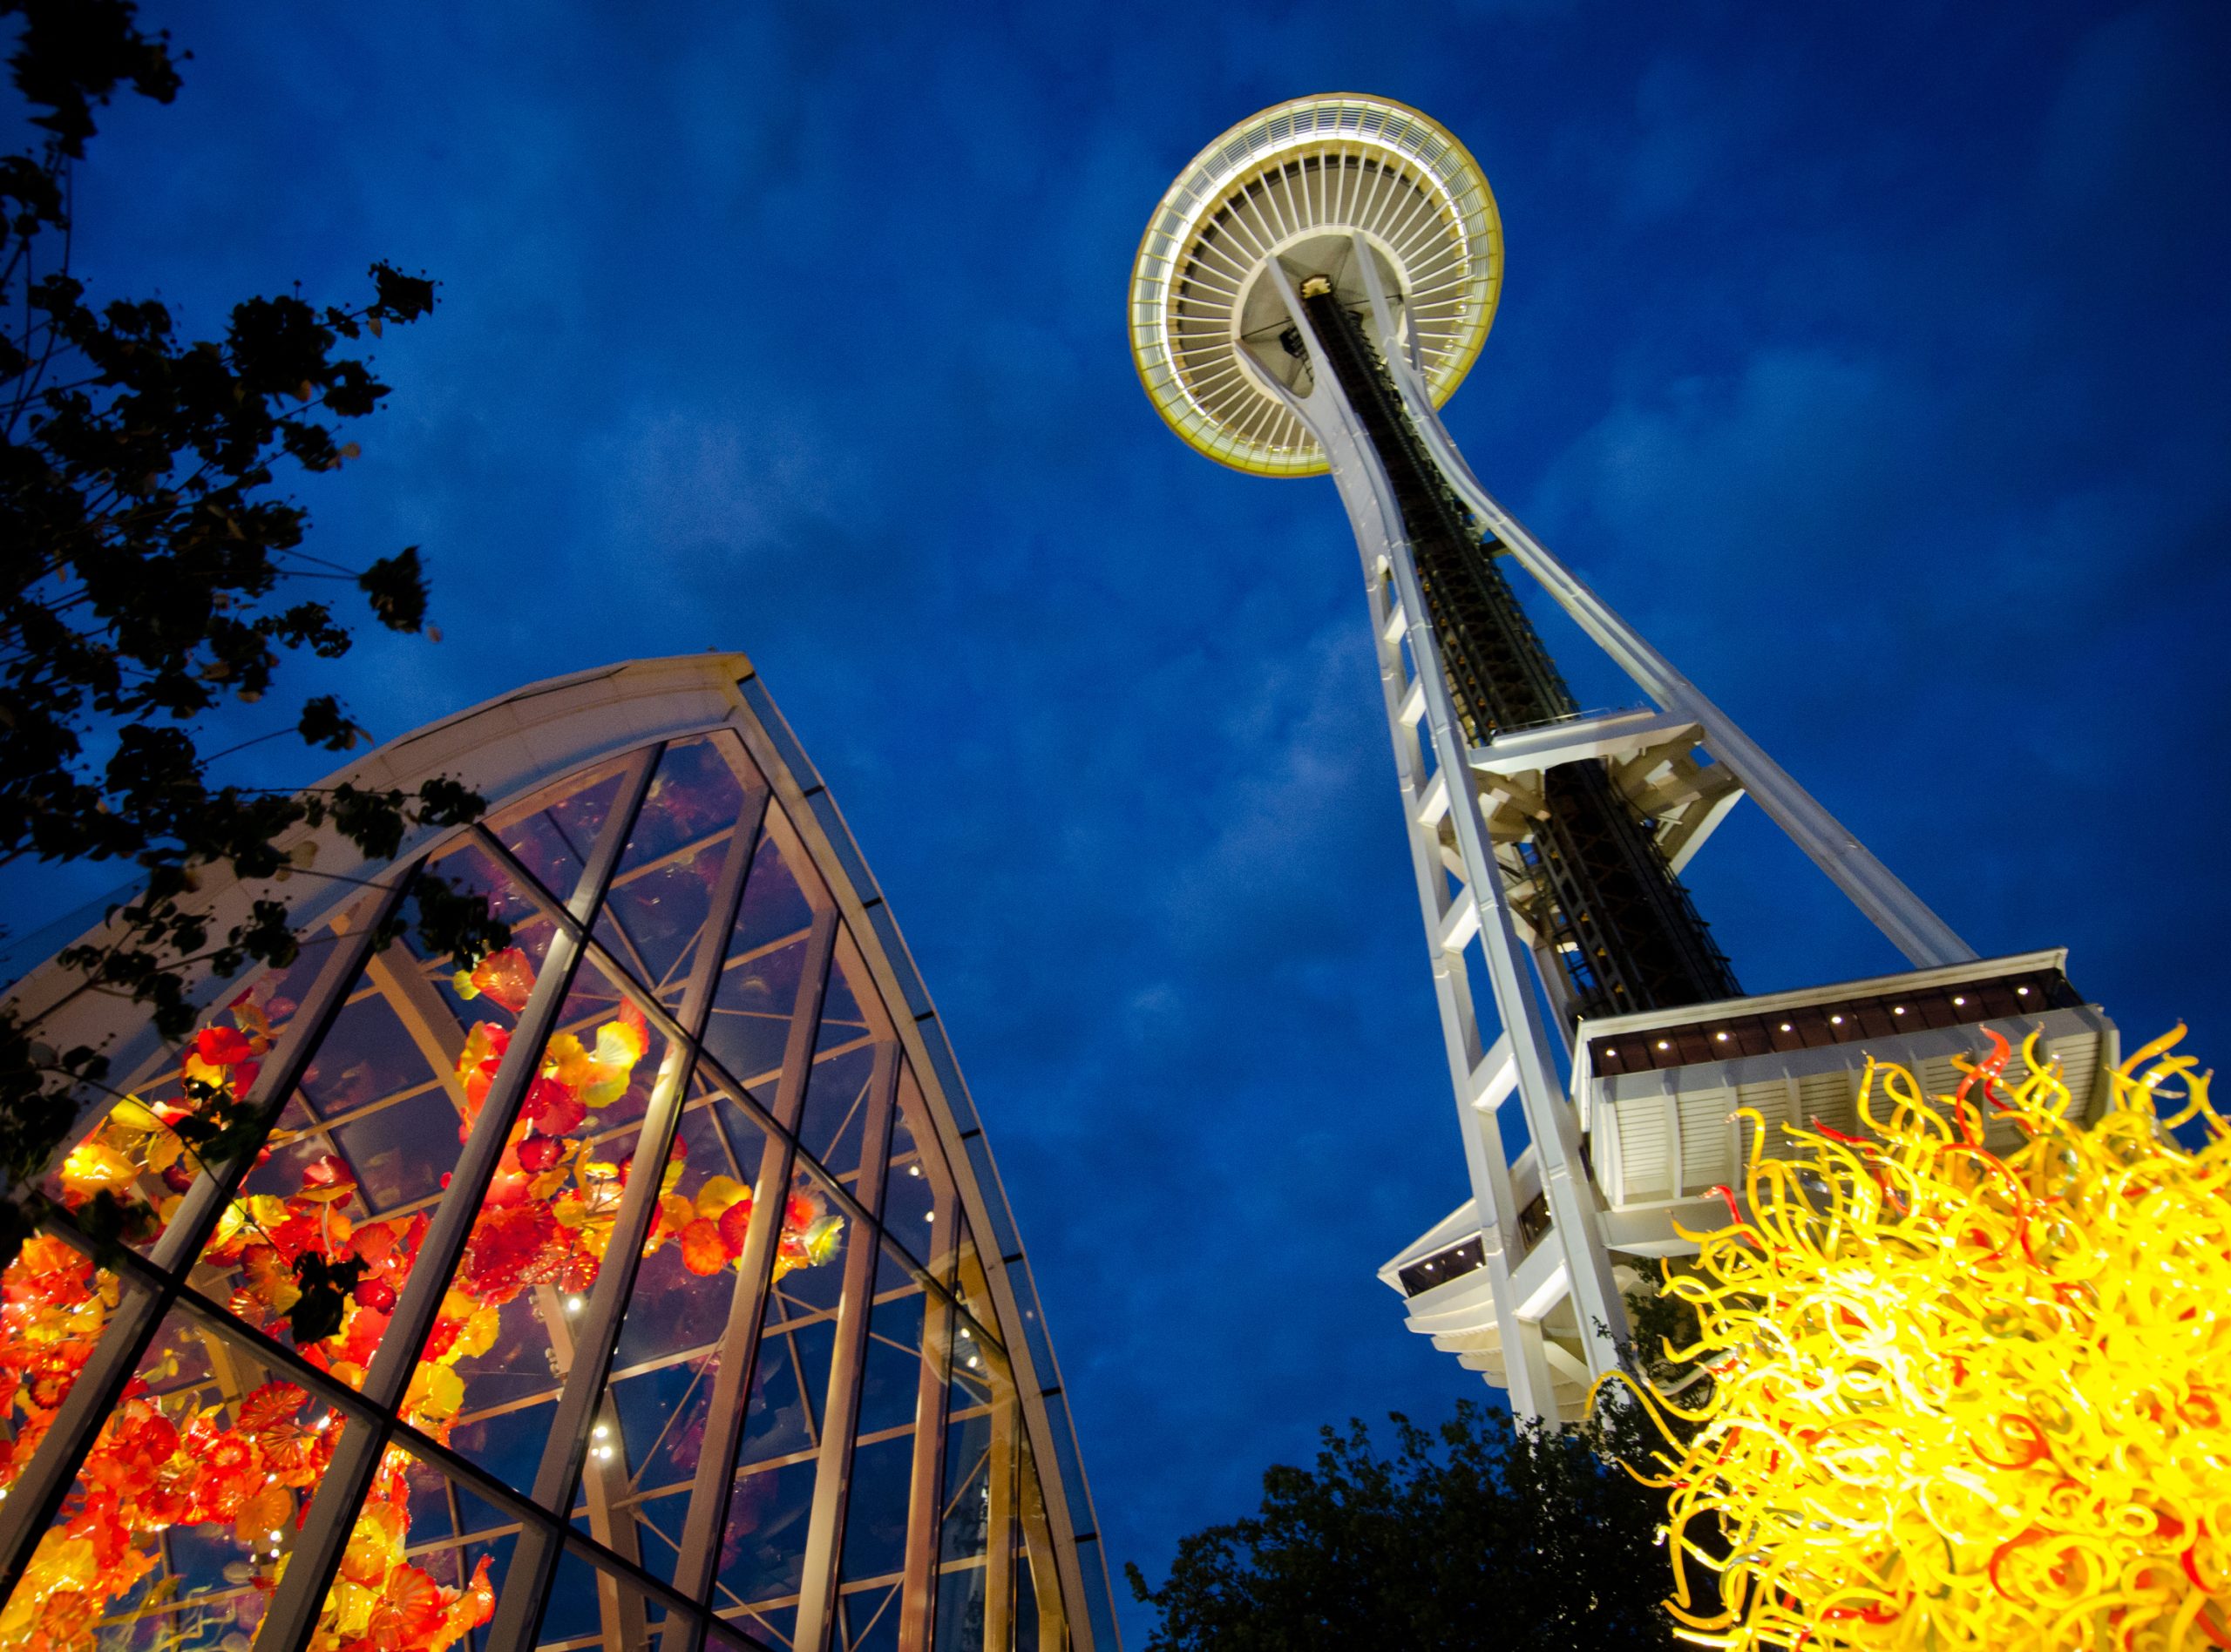 Chihuly Garden and Glass exhibit in Seattle, WA.